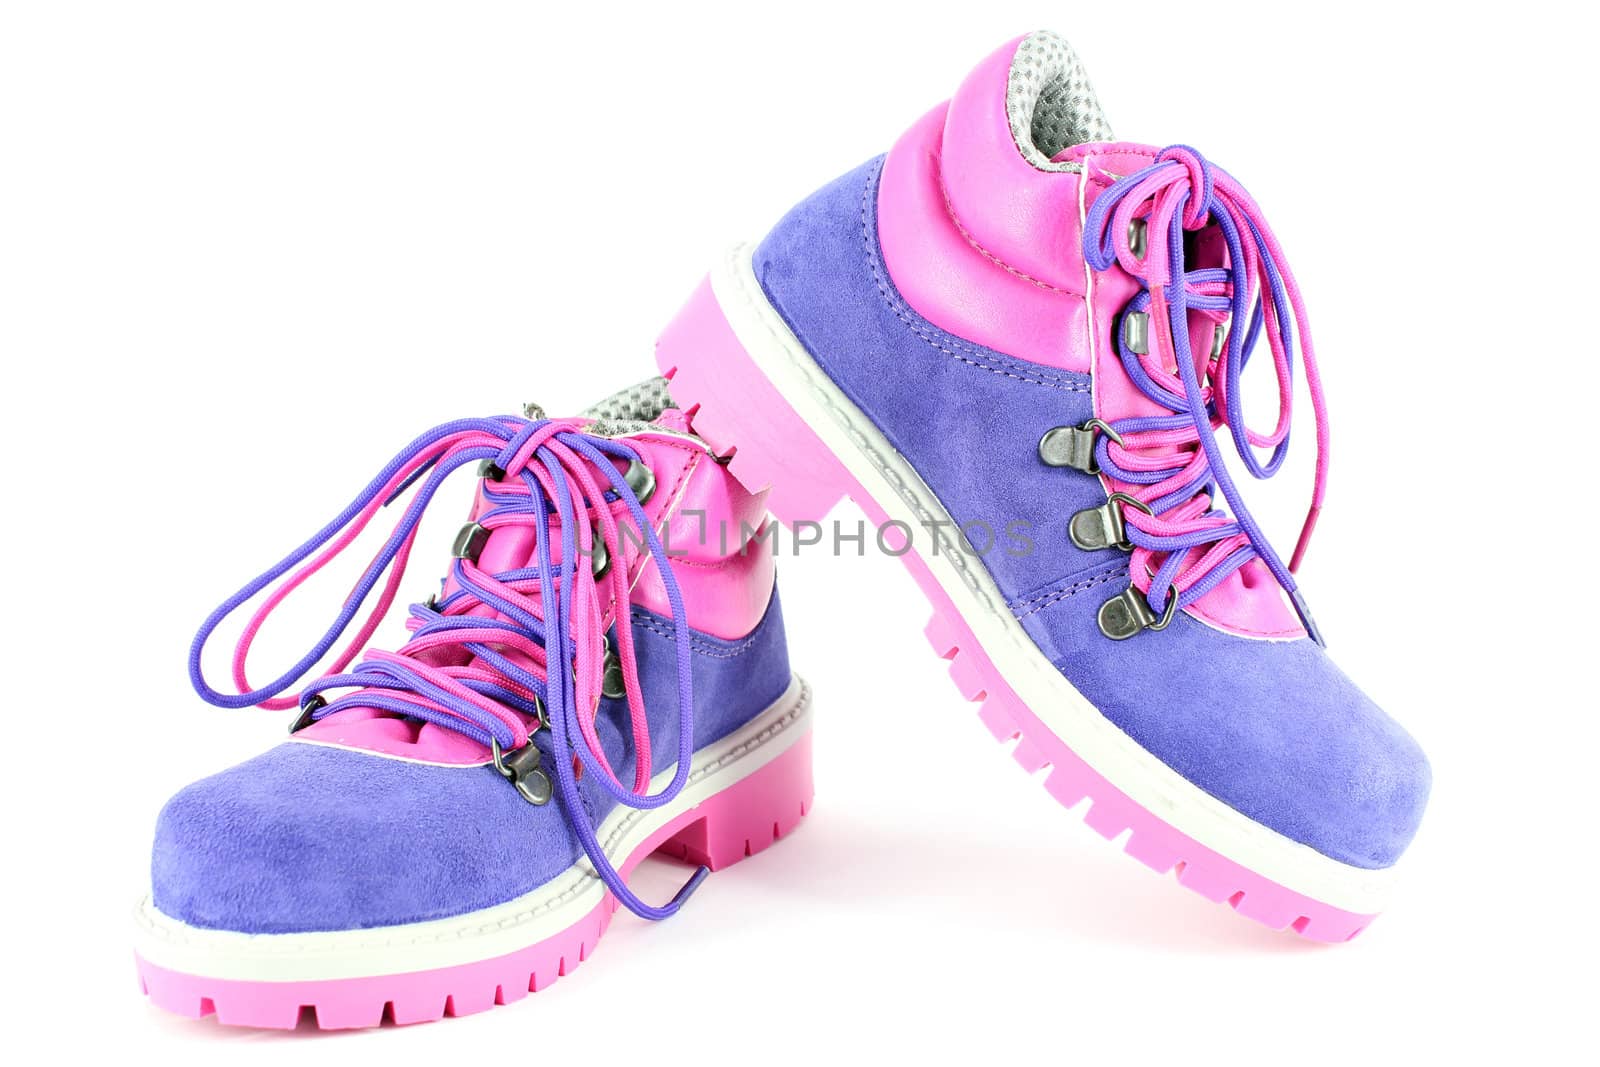 hiking boots for children by goce